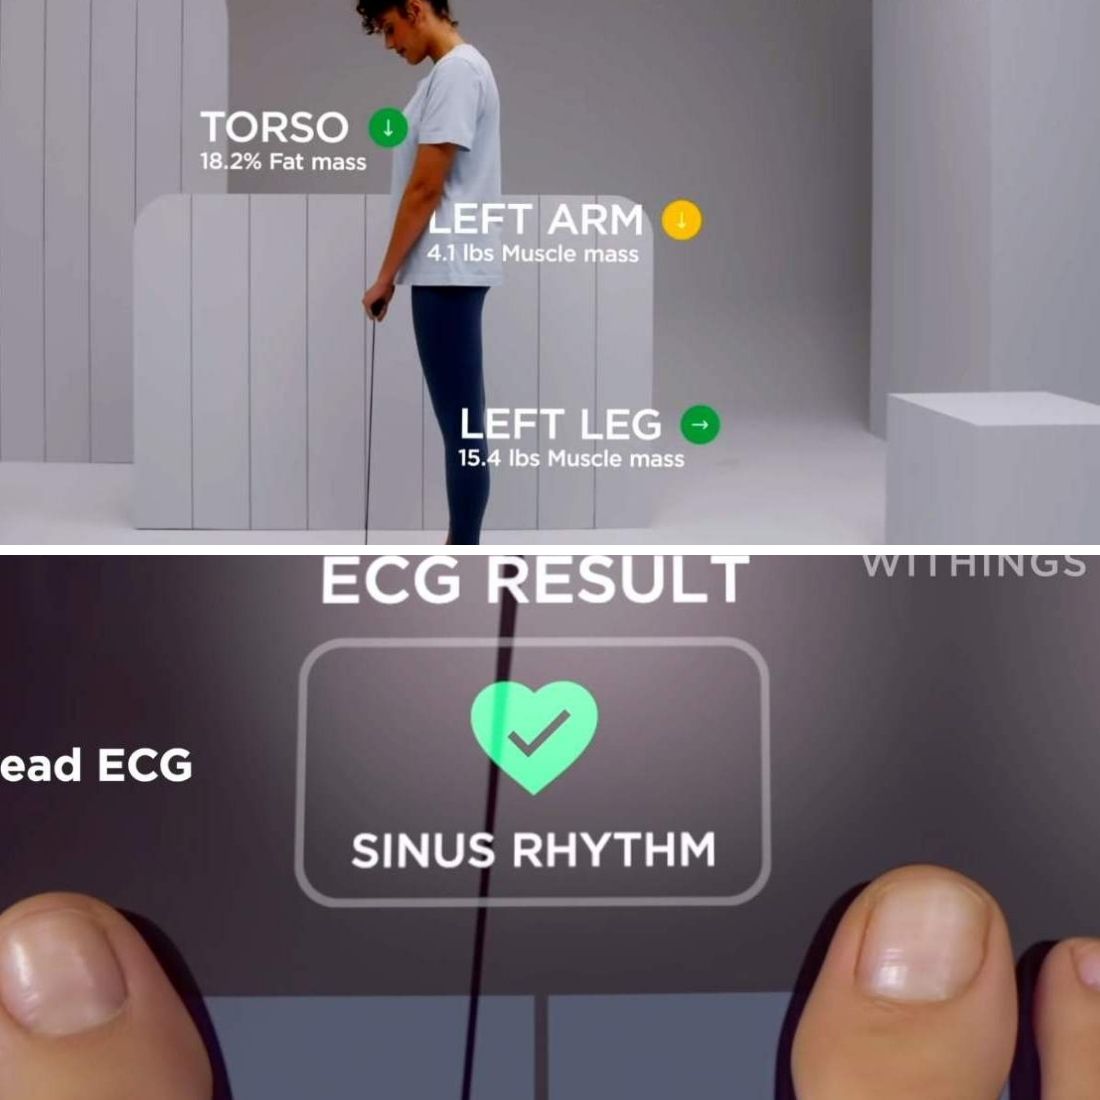 https://oldnwise.com/wp-content/uploads/2022/01/Taking-ECG-Monitoring-Vital-Signs-with-Withings-Body-Scan.jpg